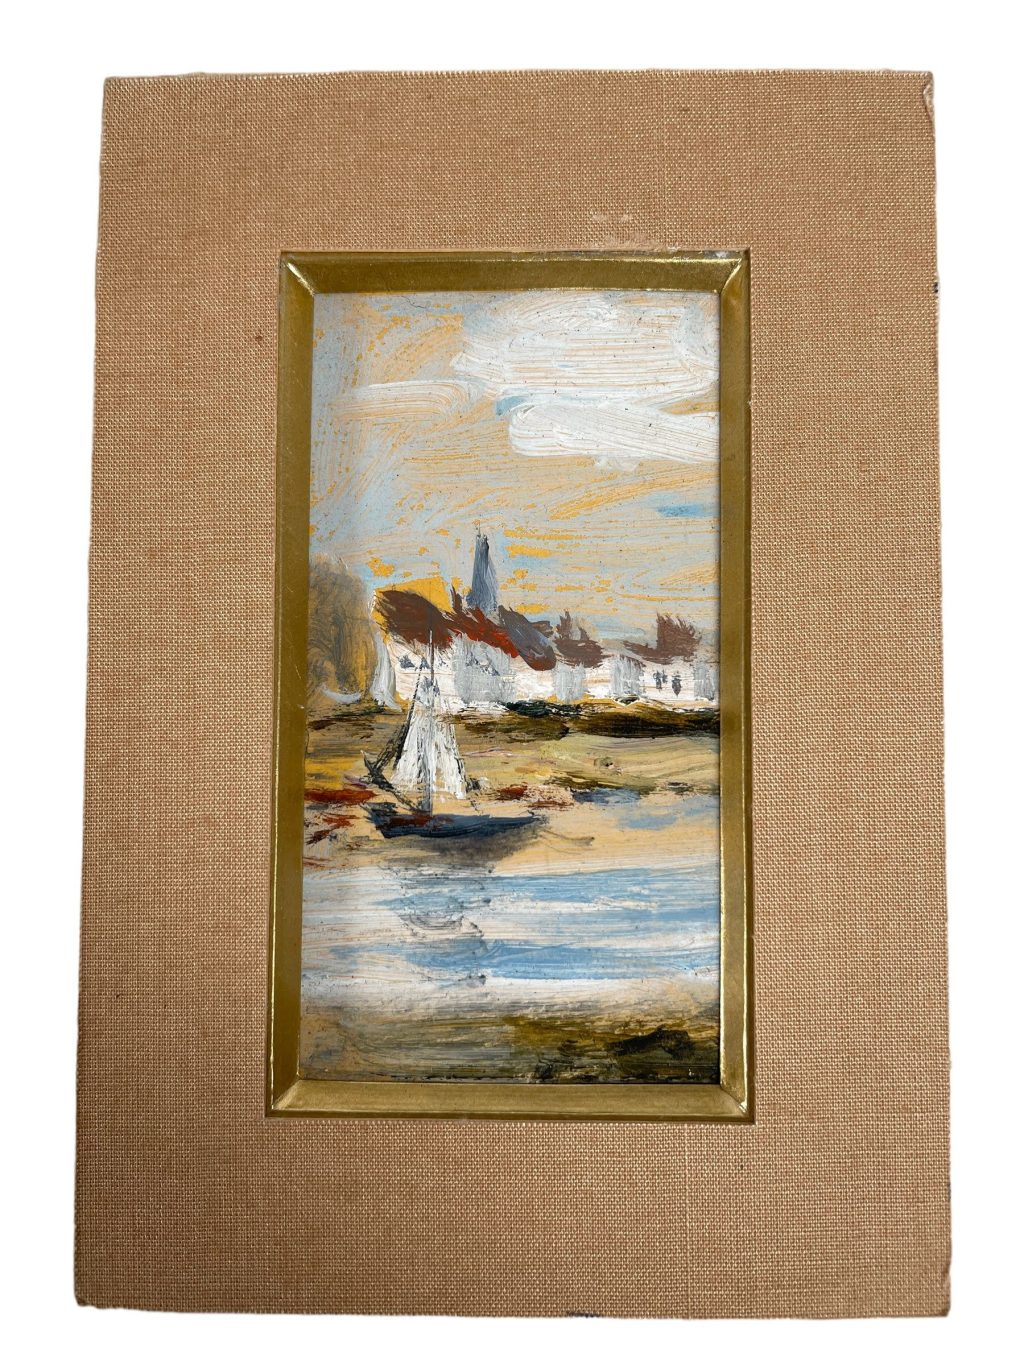 Vintage French Small Tiny Framed Sailing Boat Seascape Painting Oil Normandy Brittany On Card c1960-70’s